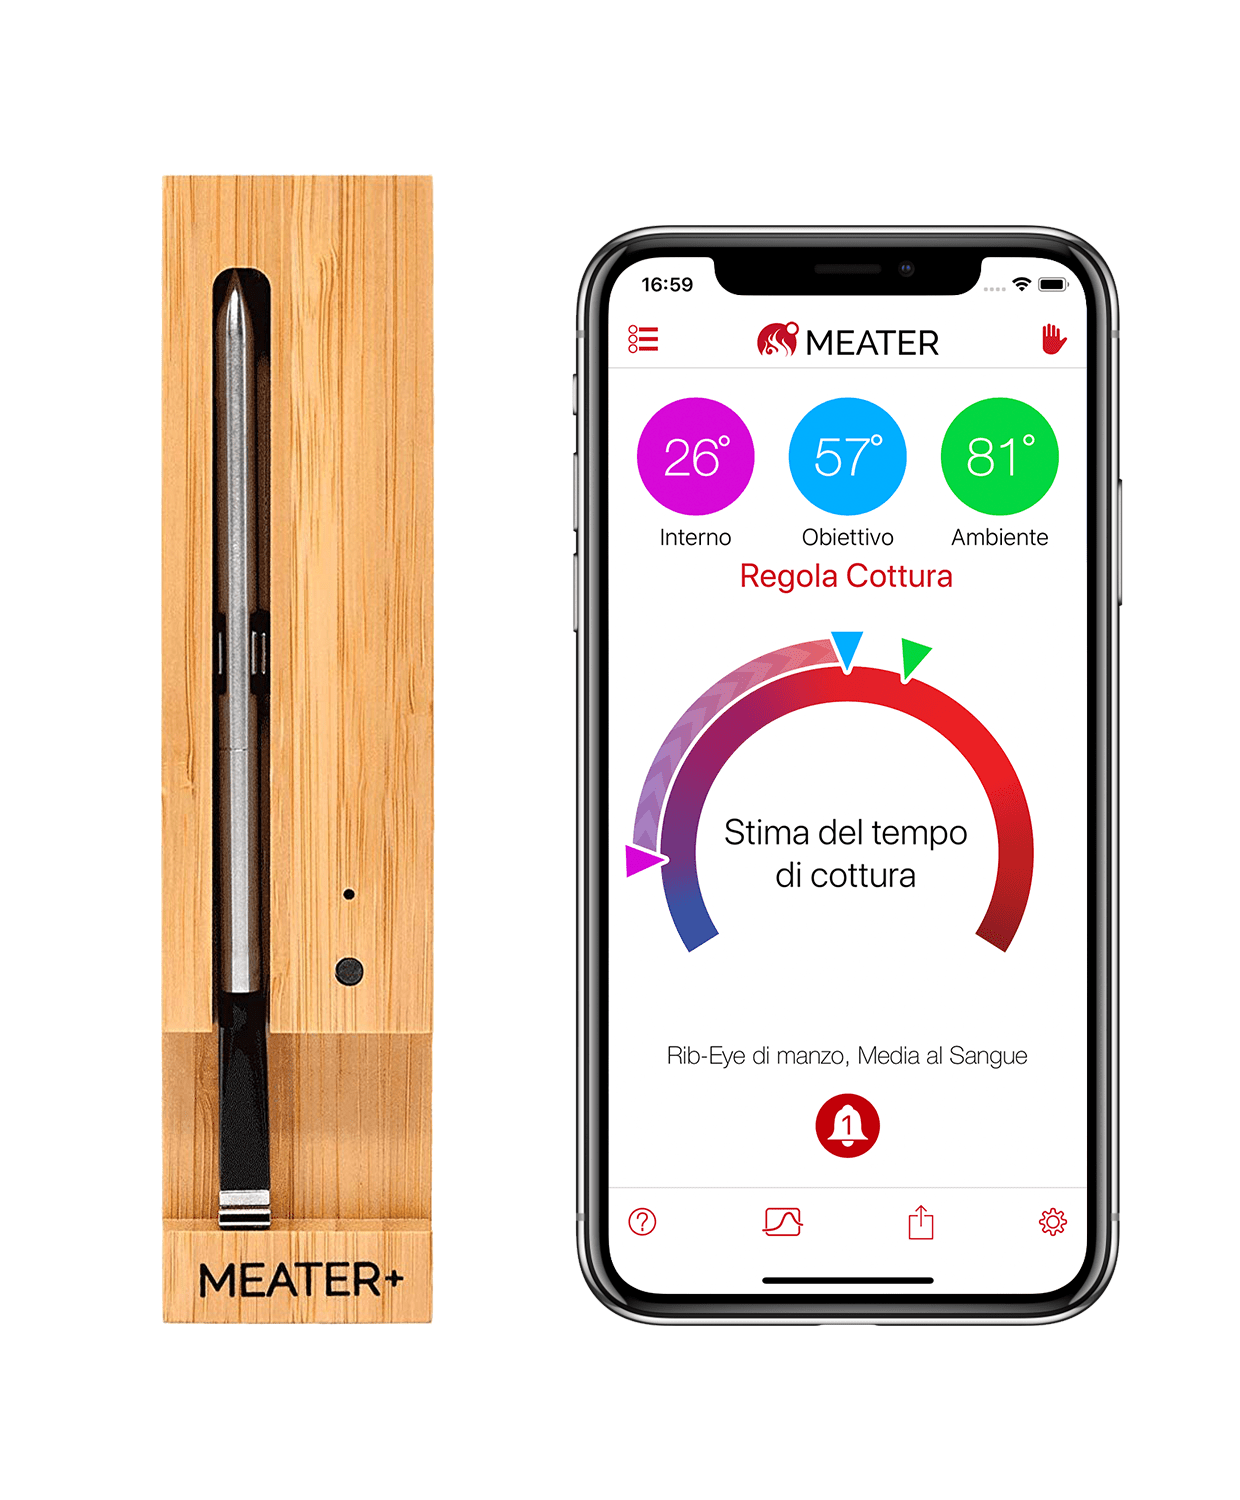 MEATER Plus: here comes the smart cooking thermometer